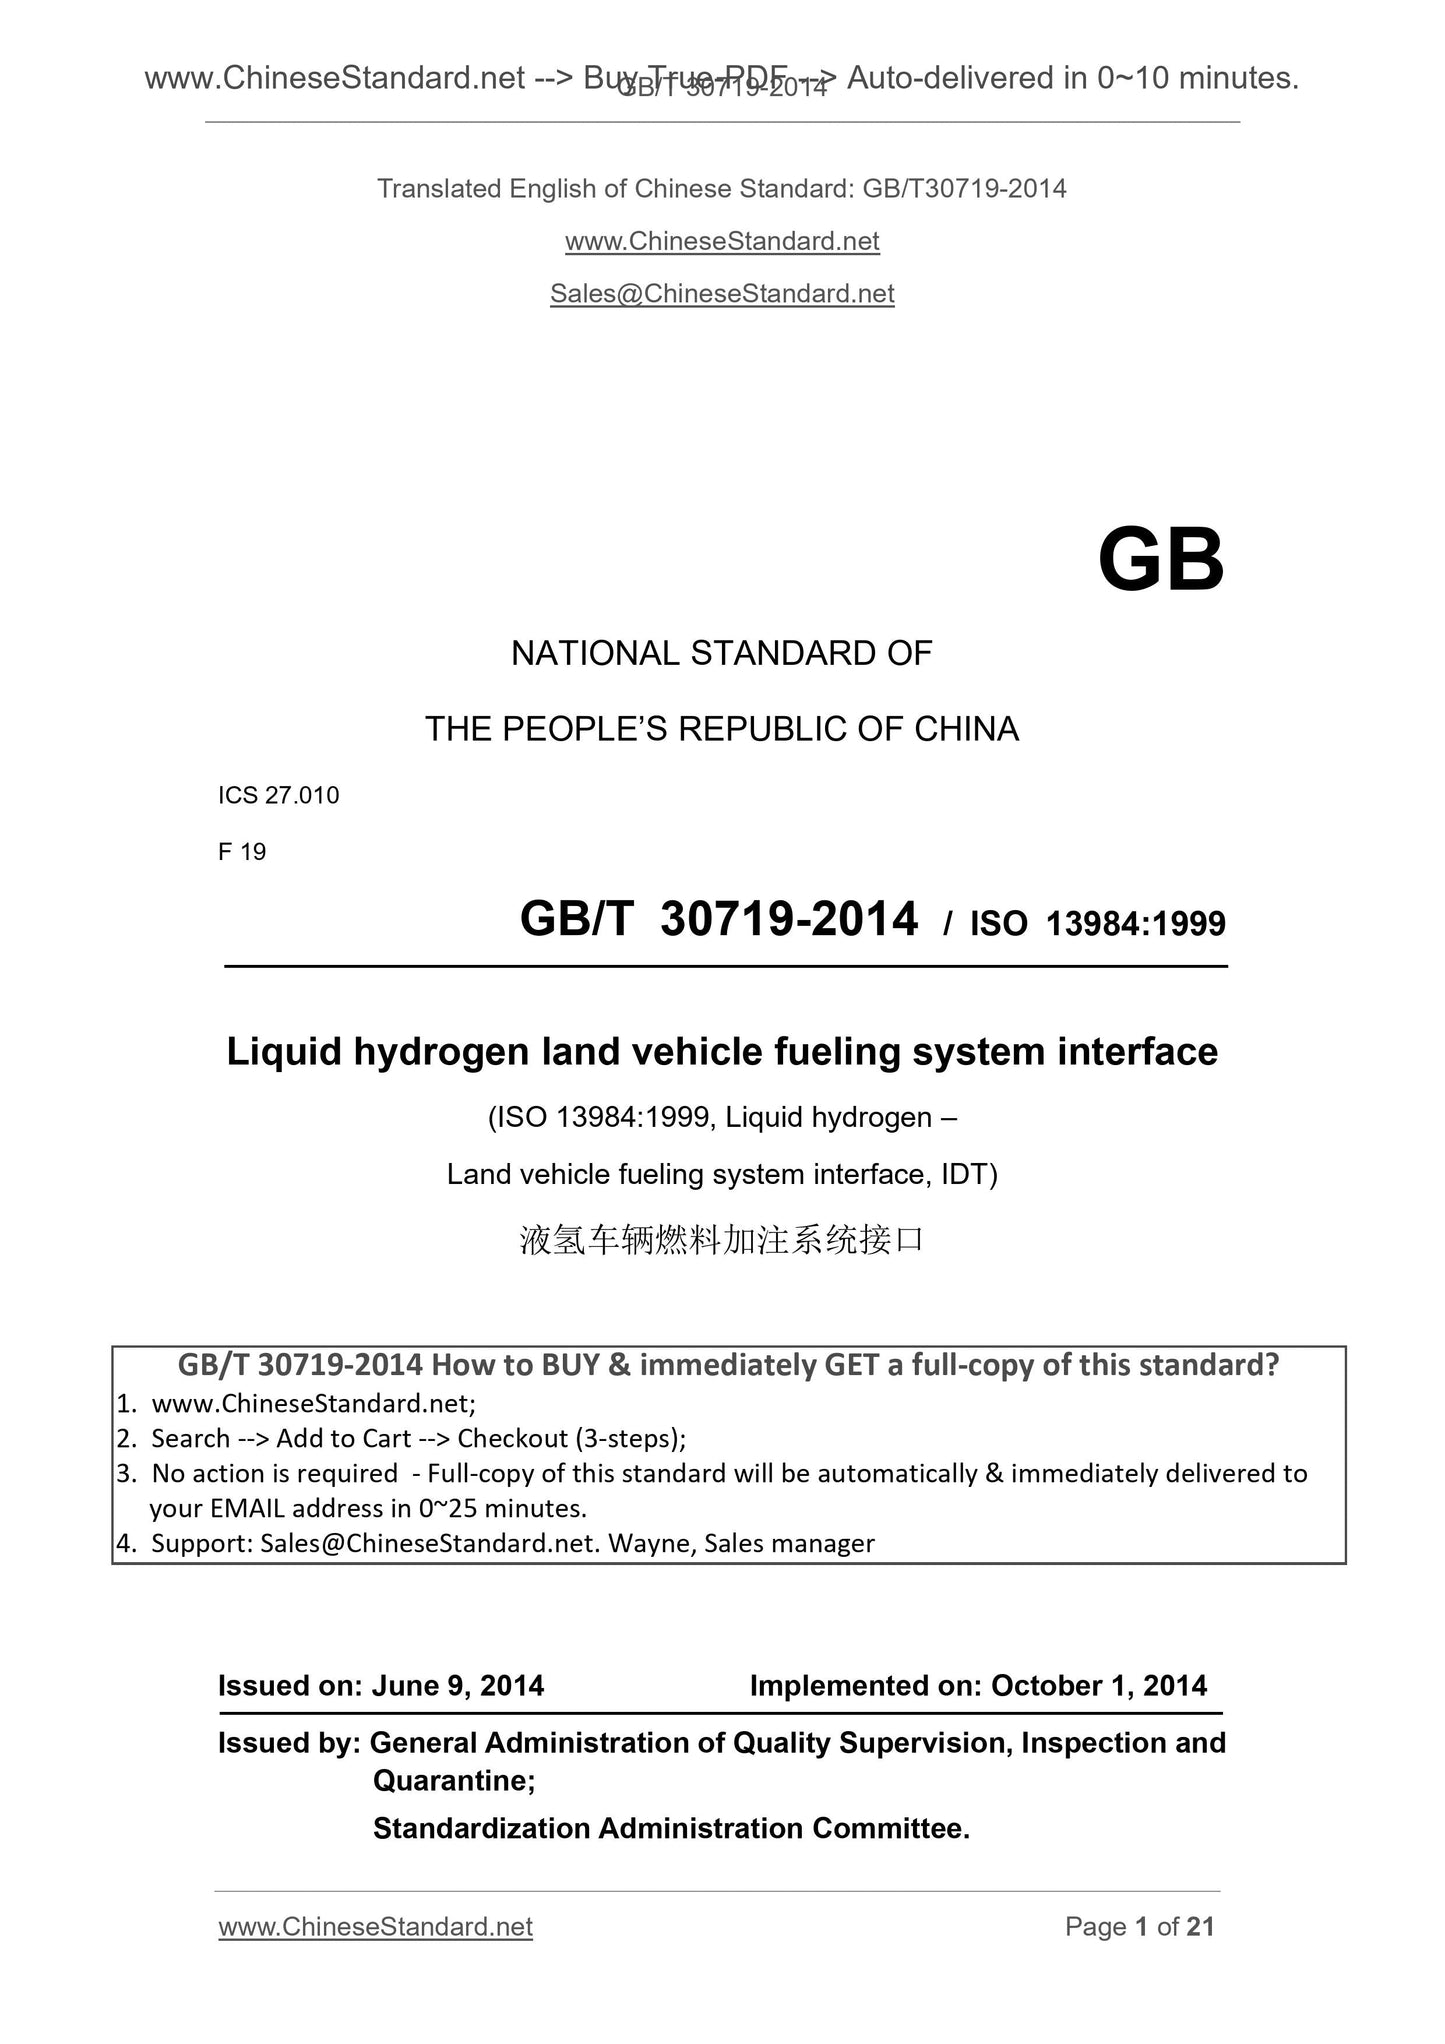 GB/T 30719-2014 Page 1